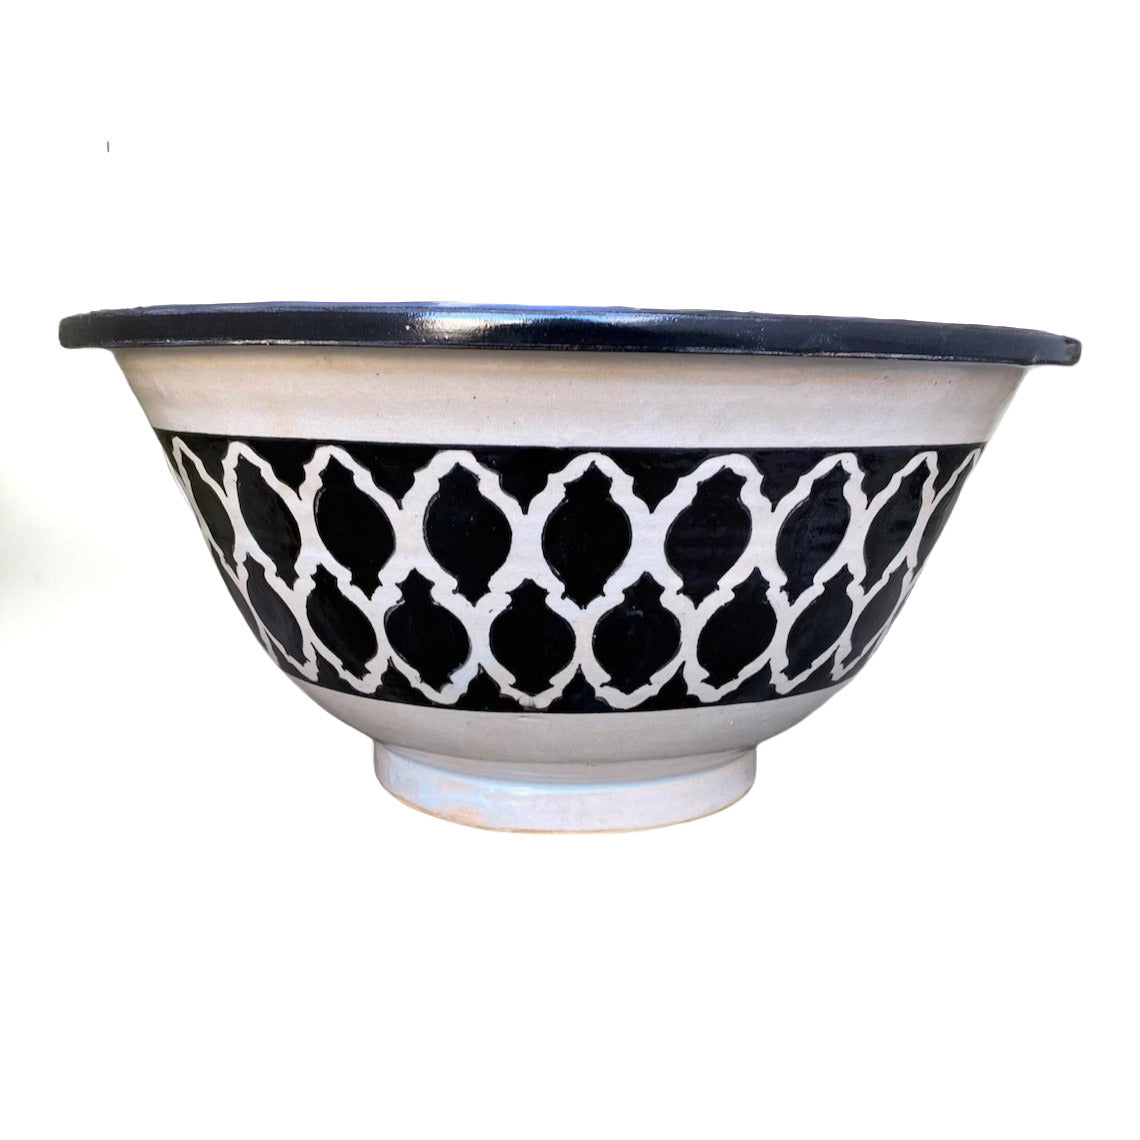 Moroccan sink | moroccan ceramic sink | bathroom sink | moroccan bathroom basin | moroccan sink bowl | Black and white sink bowl #45